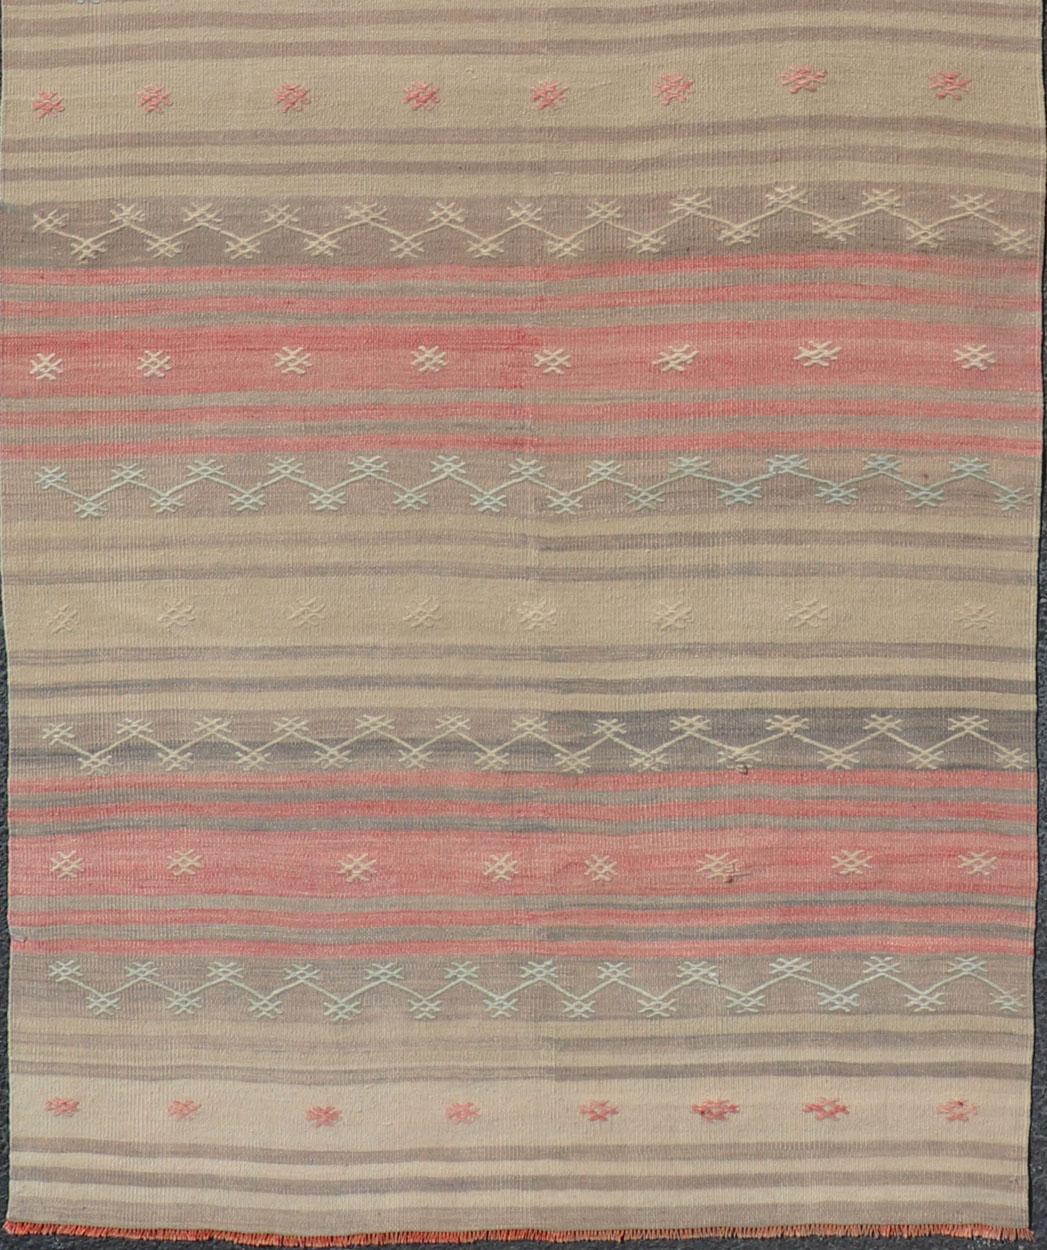 Hand-Woven Vintage Turkish Kilim with Stripes in Blue, Tan, Brown, Cream and Orange For Sale